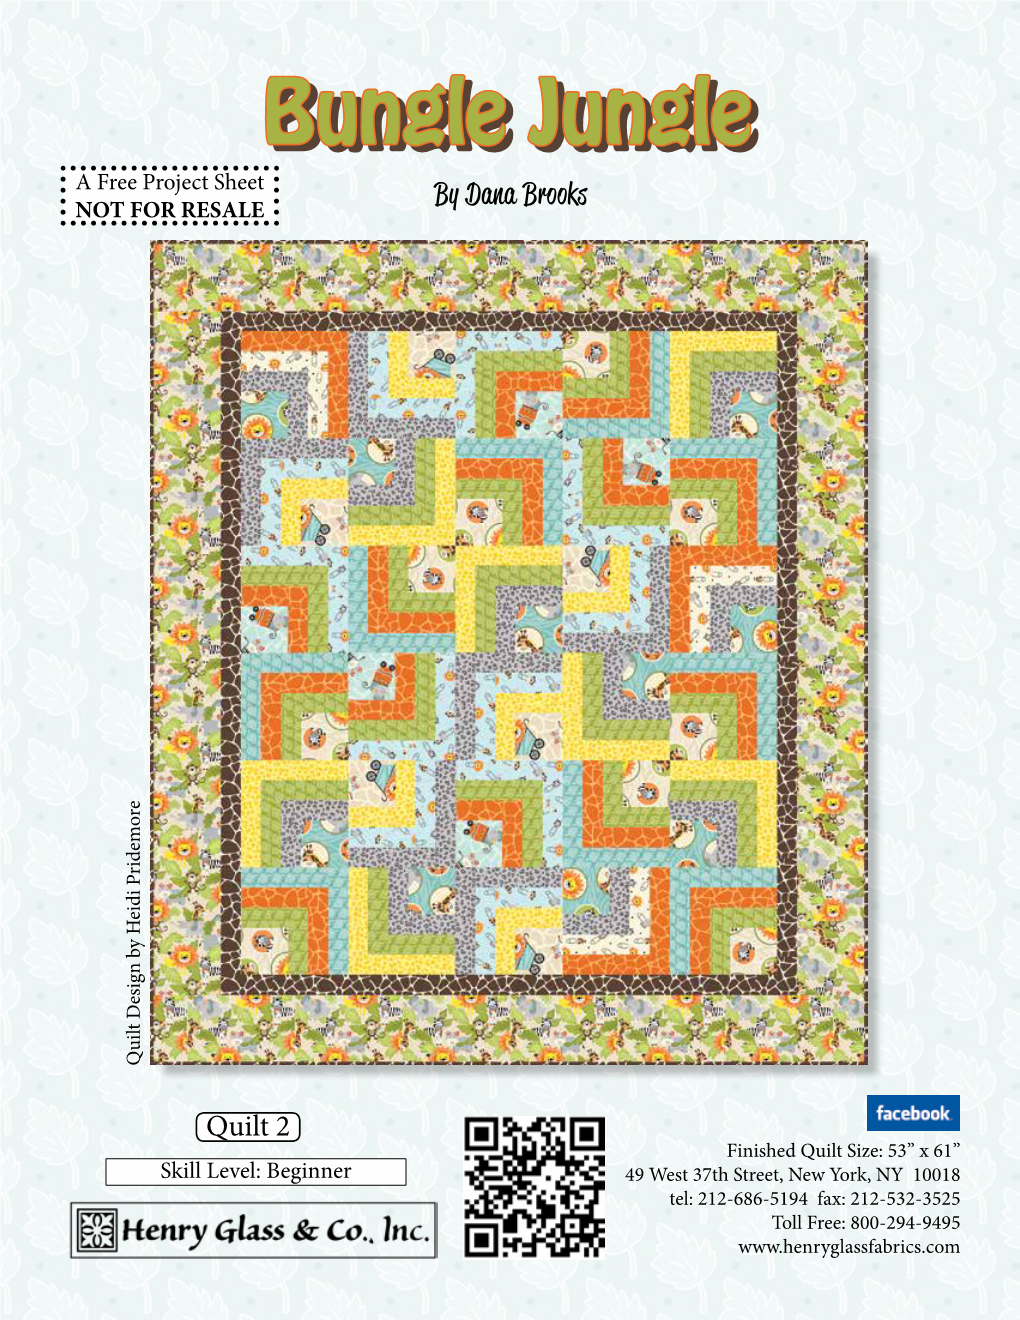 Bungle Junglejungle a Free Project Sheet by Dana Brooks NOT for RESALE Quilt Design by Heidi Pridemore Heidi Designquilt By